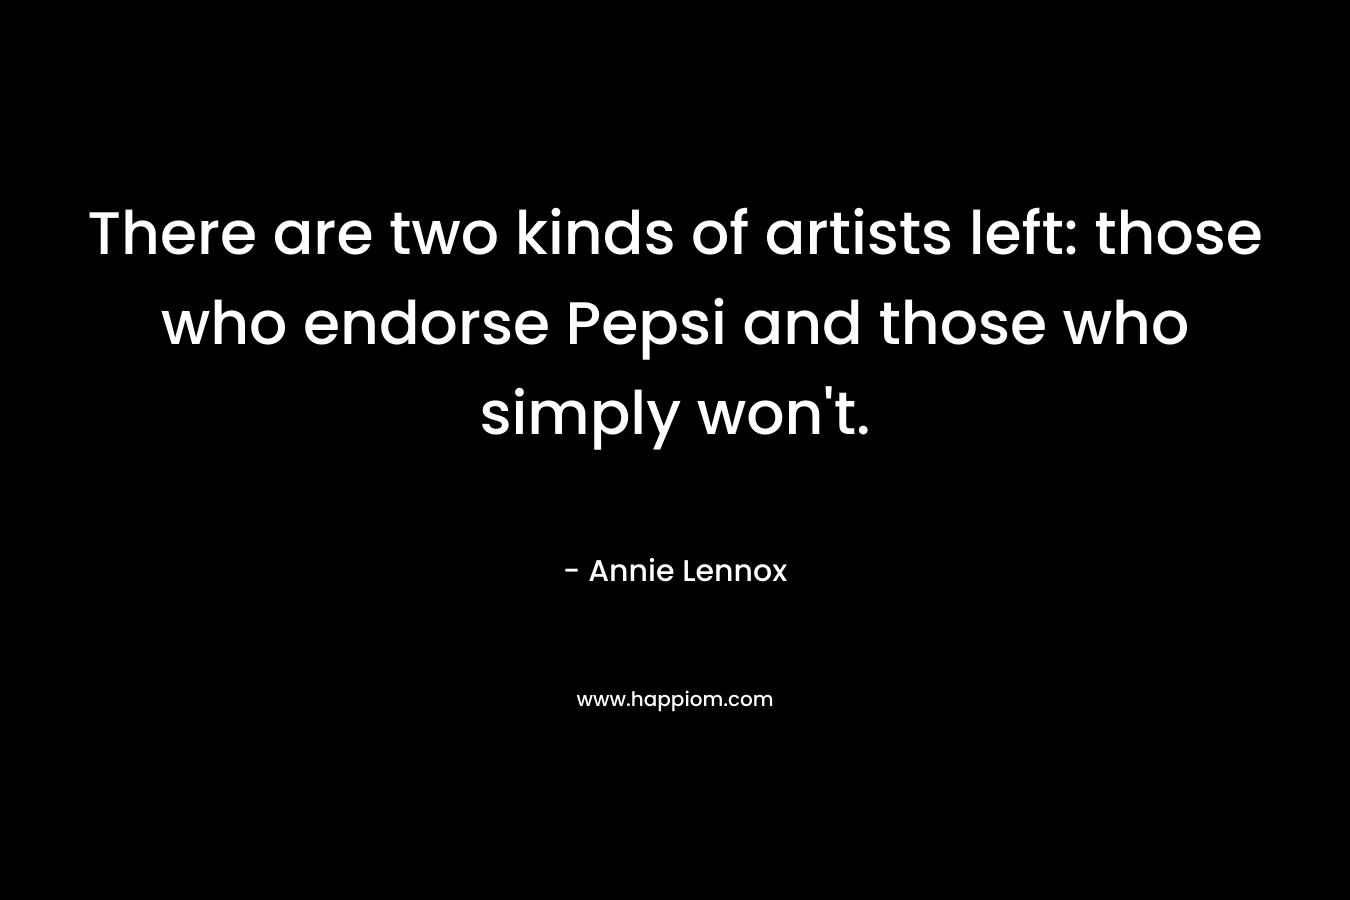 There are two kinds of artists left: those who endorse Pepsi and those who simply won’t. – Annie Lennox